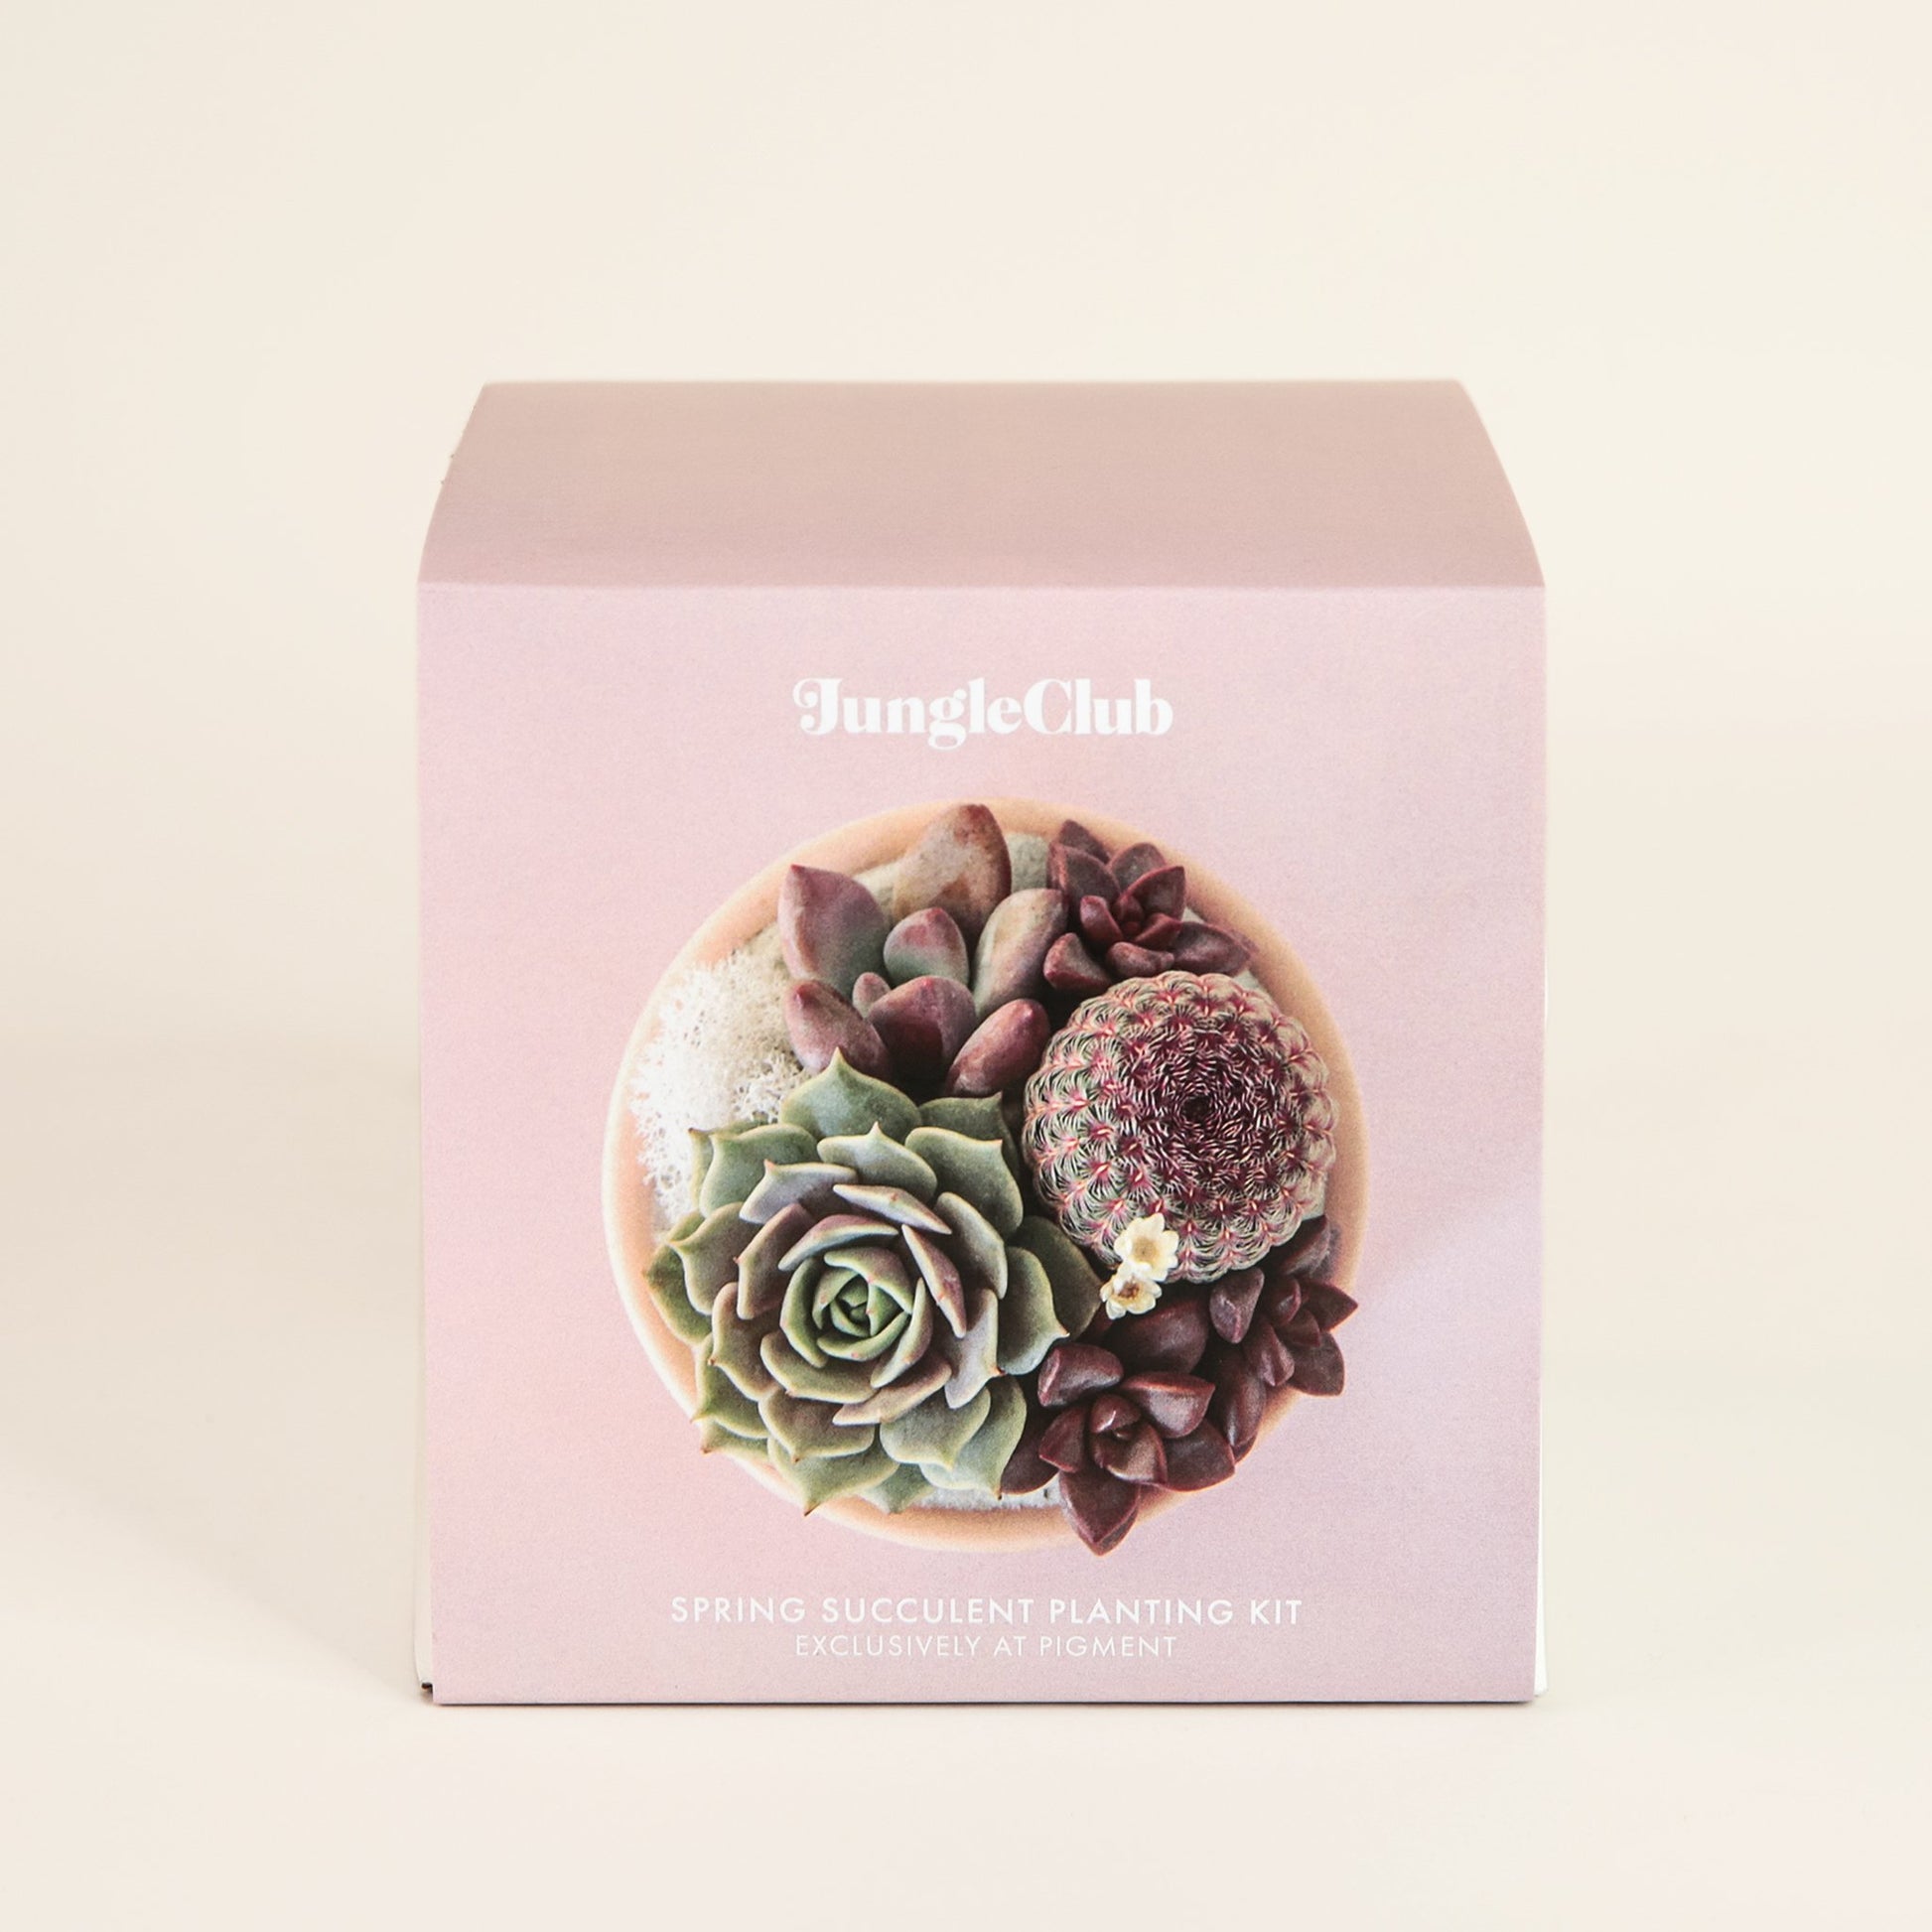 Small pink packaging of small planting kit. The packaging is light lavender and includes an image of a completed succulent planting and is labeled 'JungleClub'.